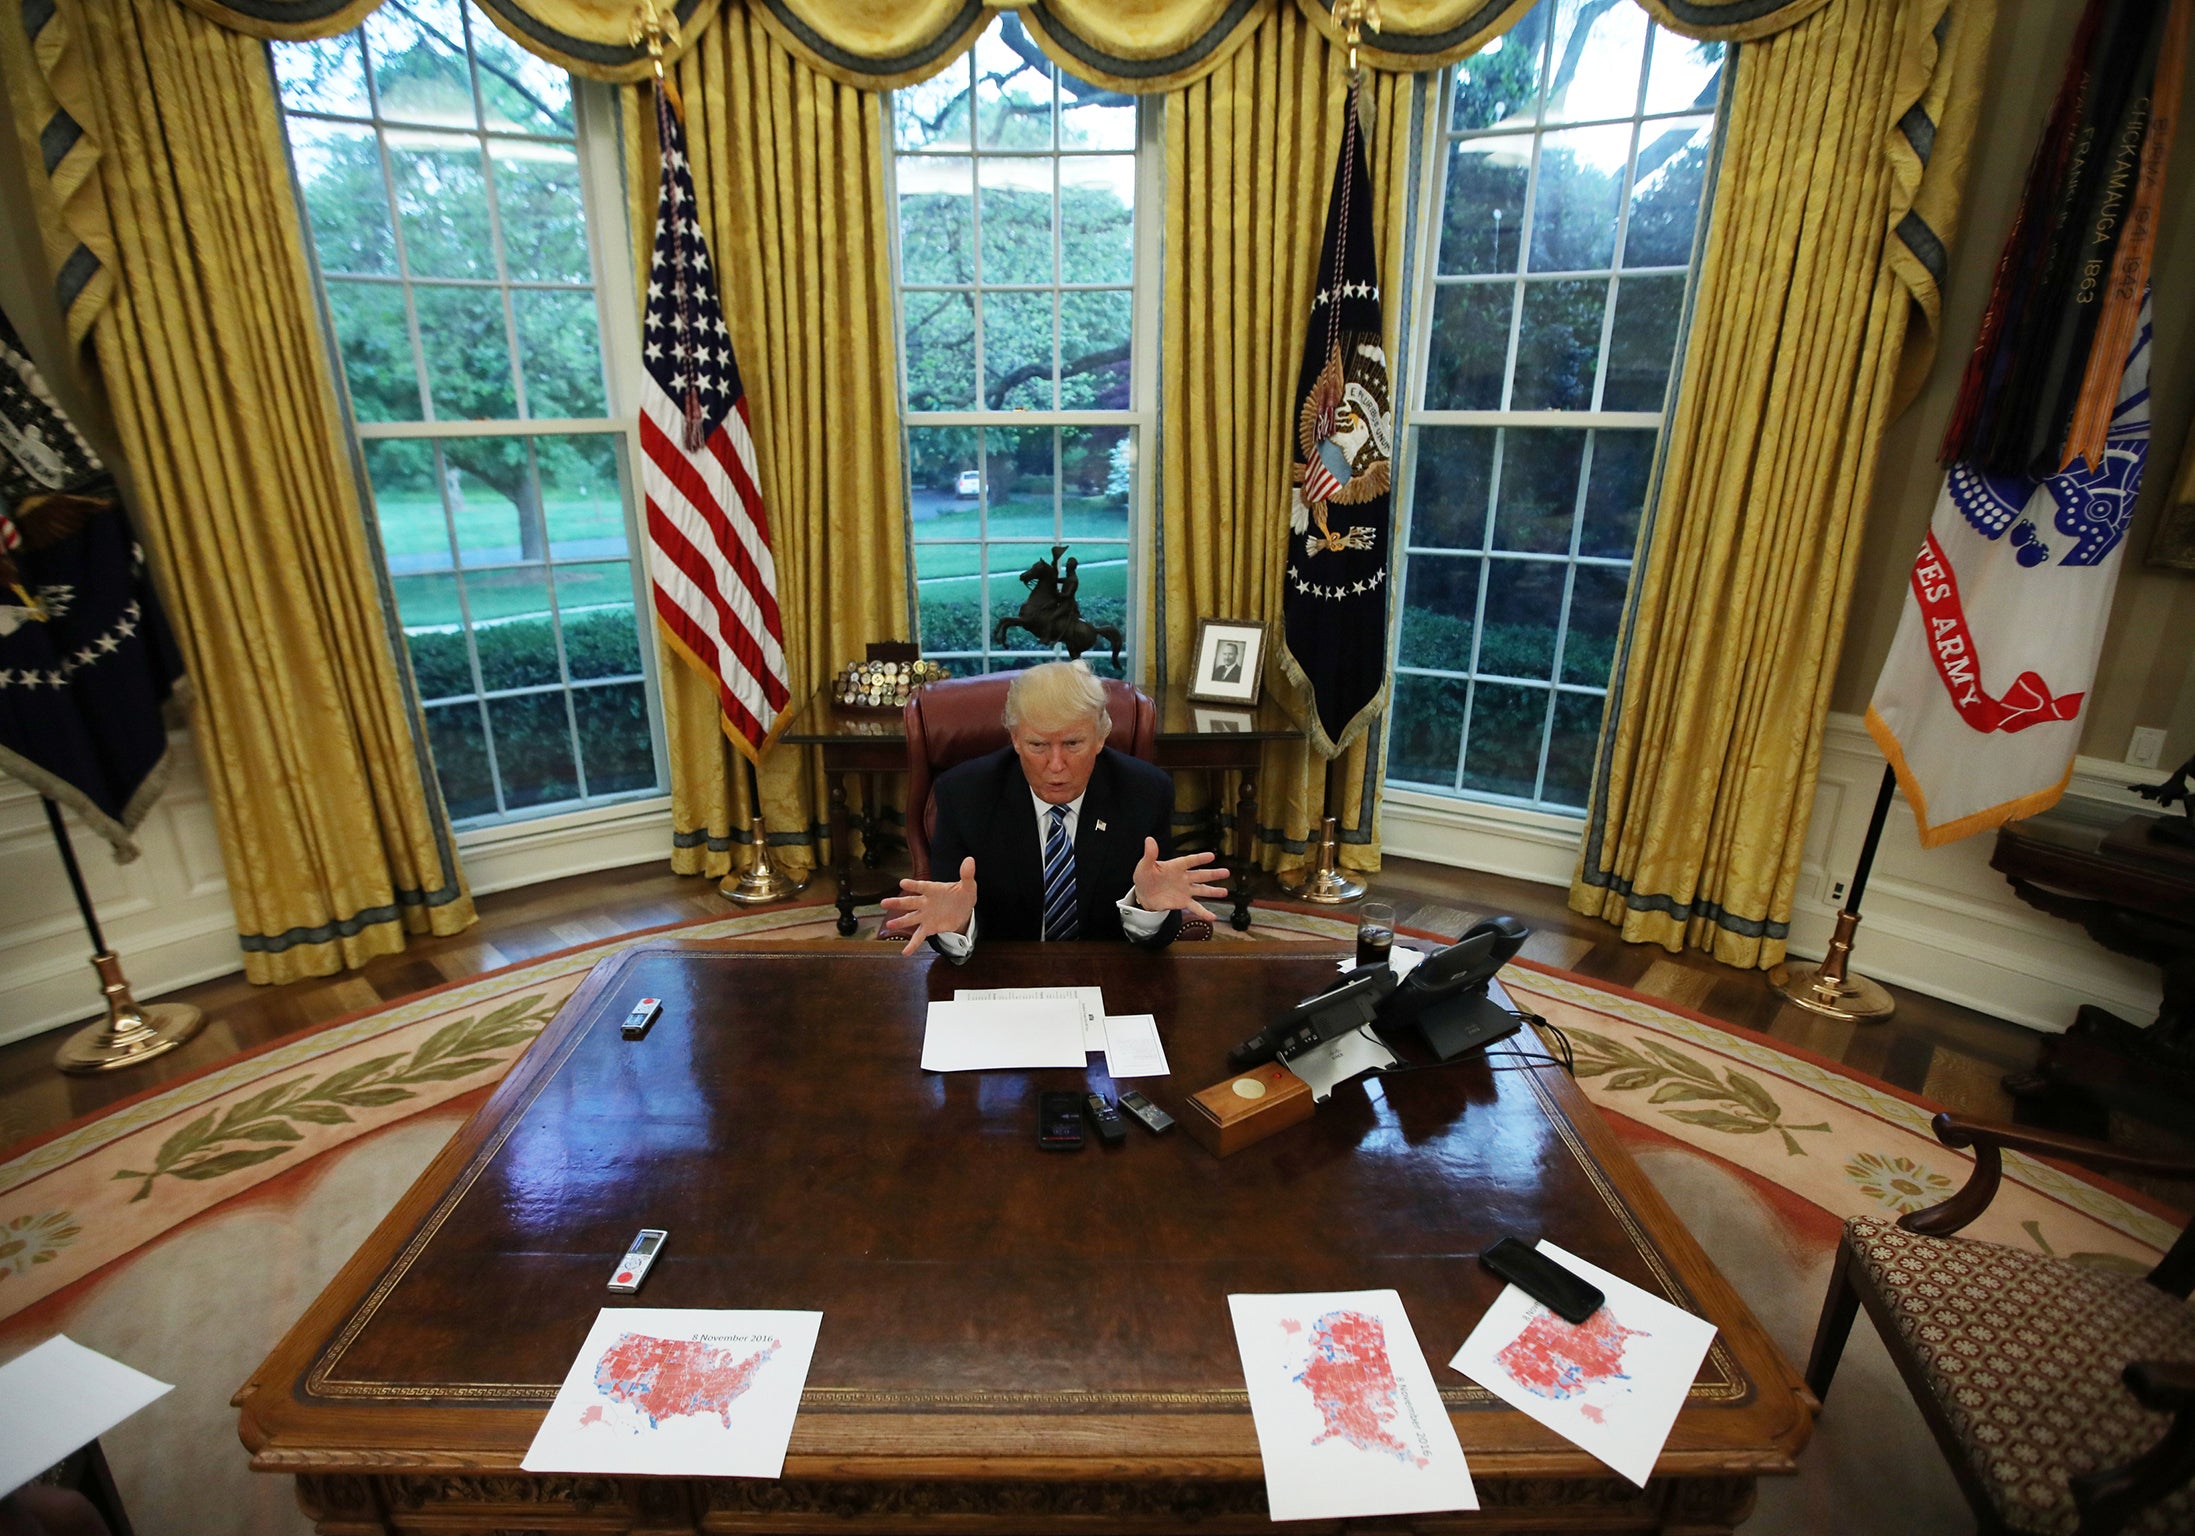 From his desk in the Oval Office the President has the power to wreak havoc or pursue peace in the region